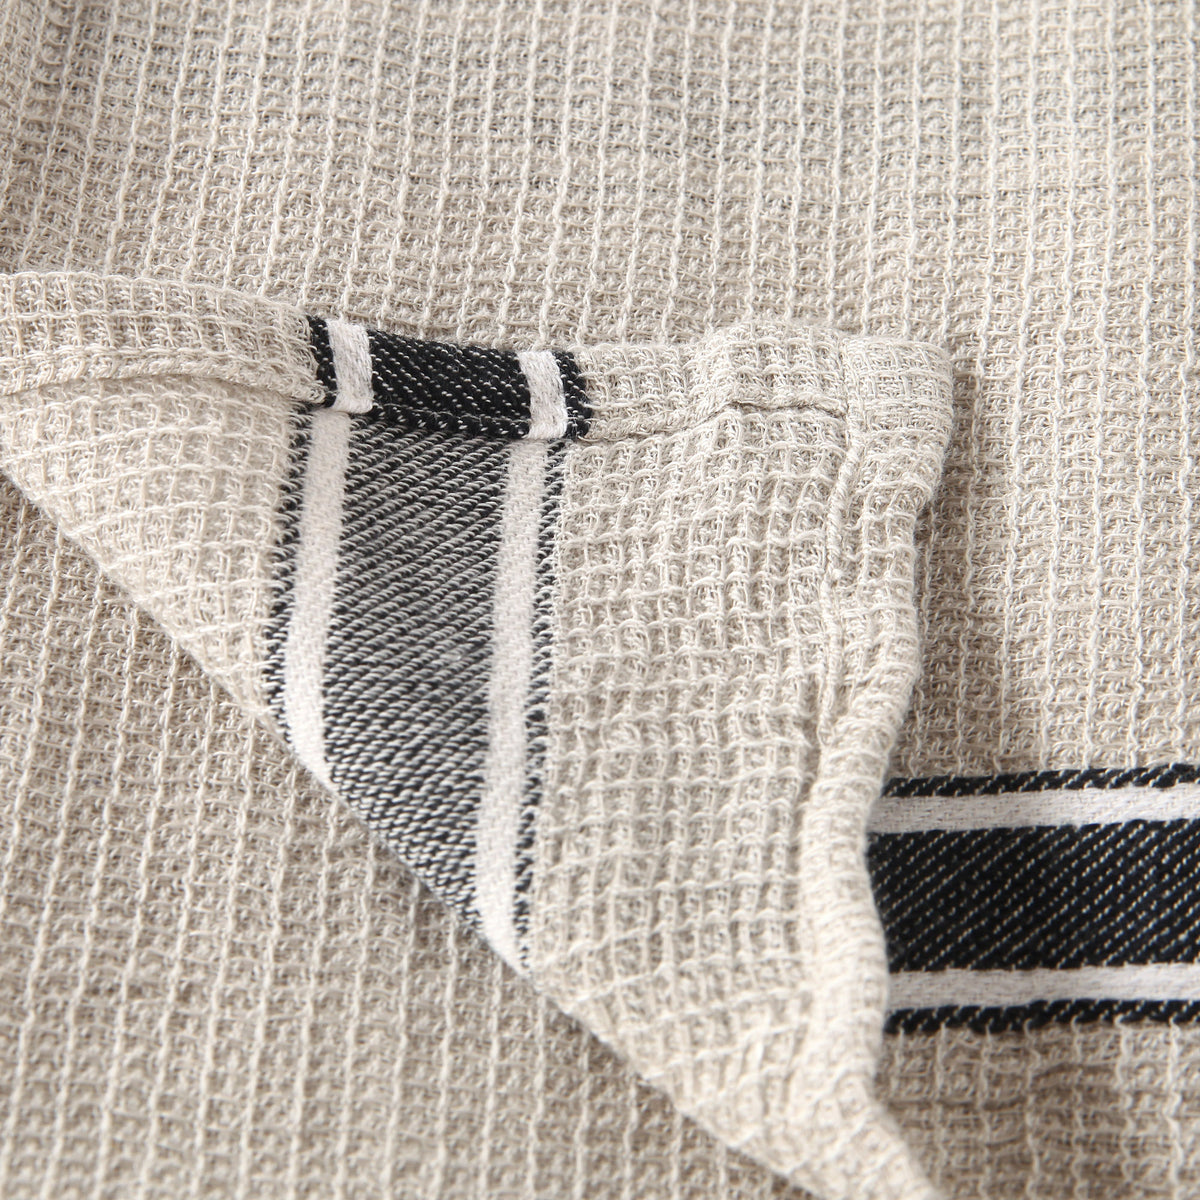 Rustic Parma Kitchen Towel - Olive and Linen